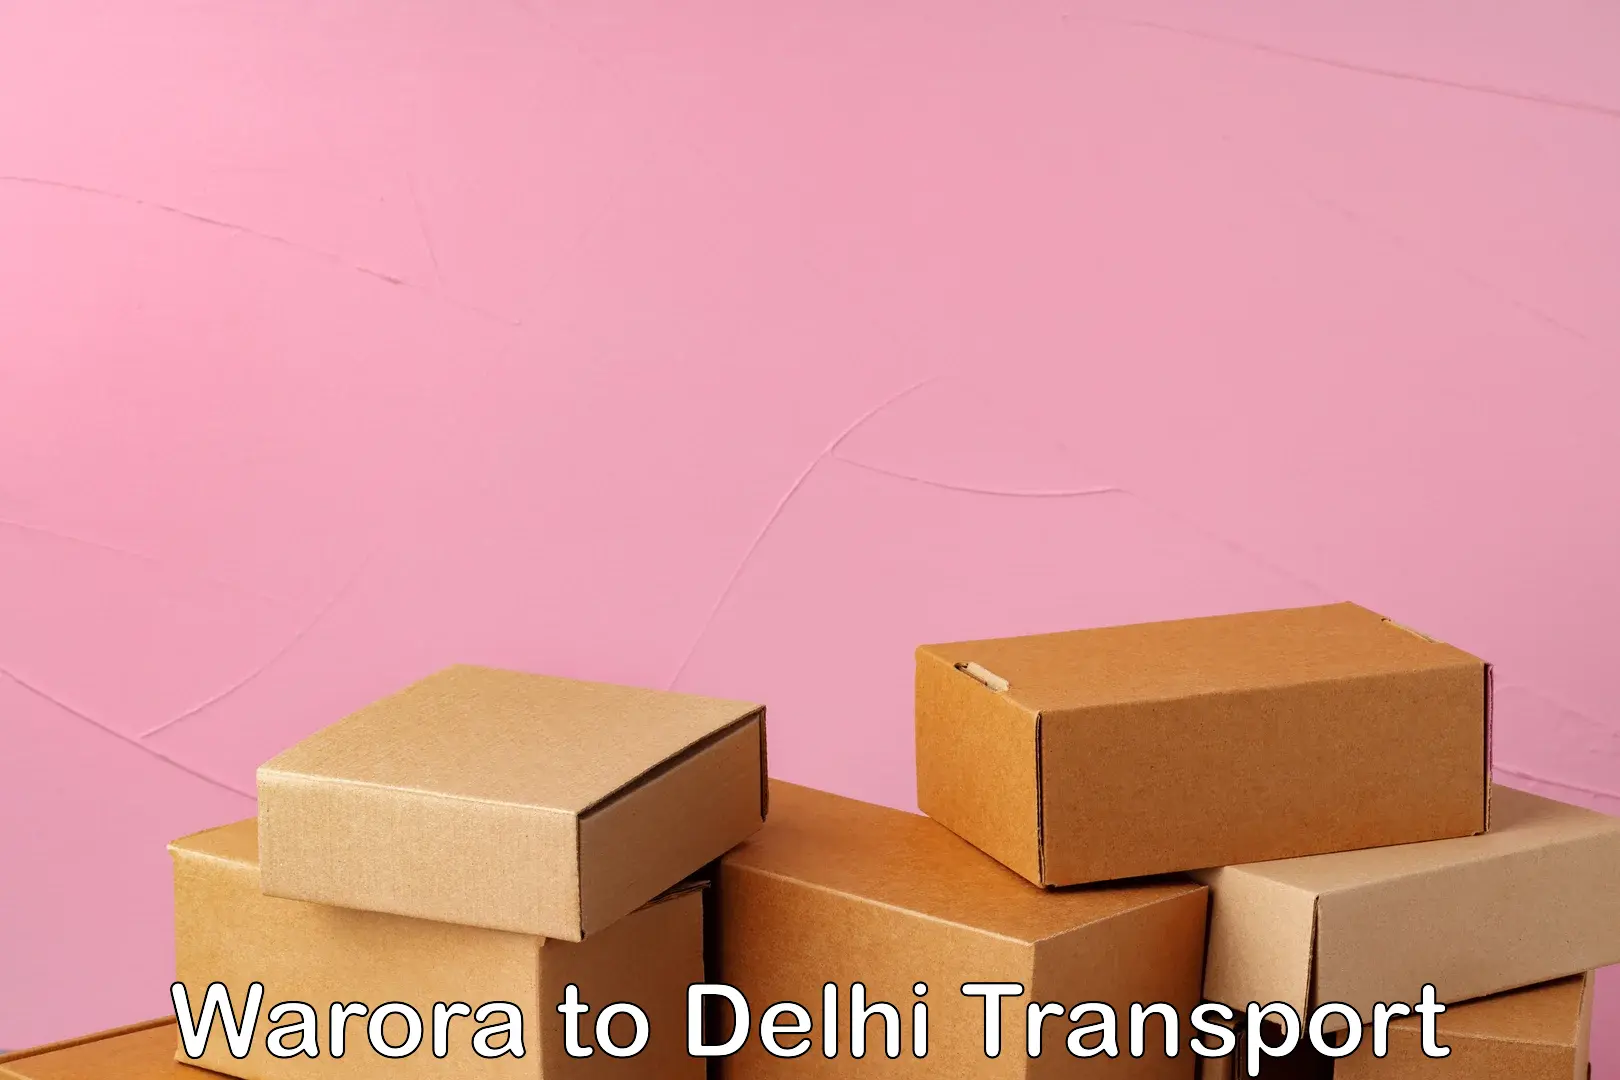 Air freight transport services Warora to NCR